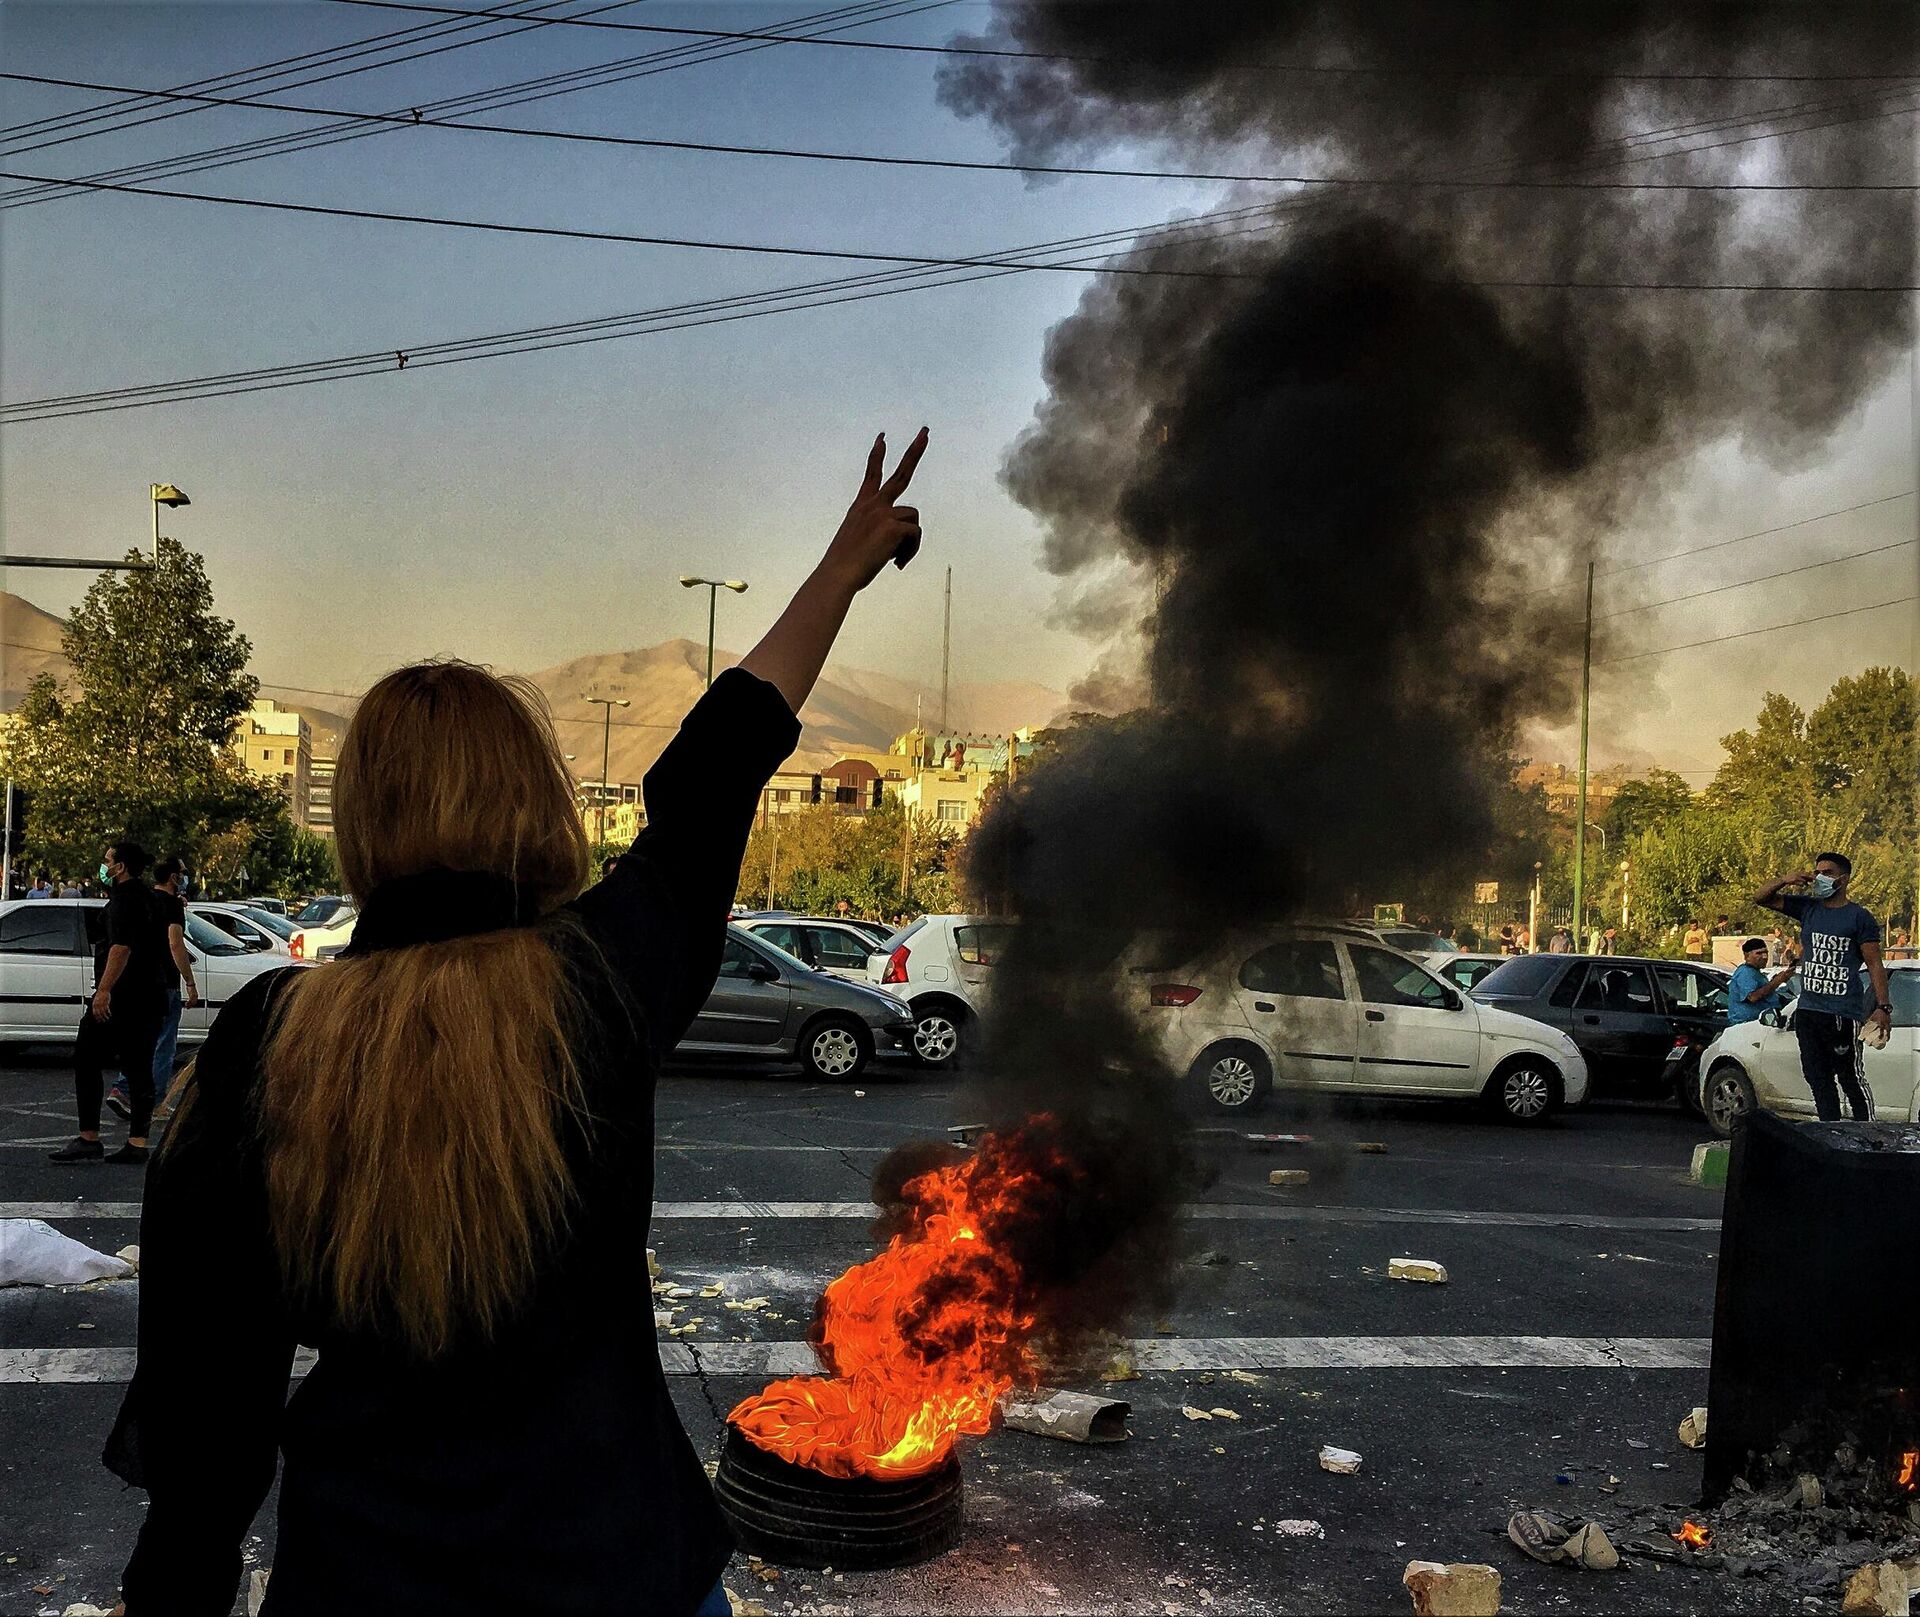 Iranians woman protests a 22-year-old woman Mahsa Amini's death after she was detained by the morality police, in Tehran, Saturday, Oct. 1, 2022. in this photo taken by an individual not employed by the Associated Press and obtained by the AP outside Iran. - Sputnik International, 1920, 14.11.2022